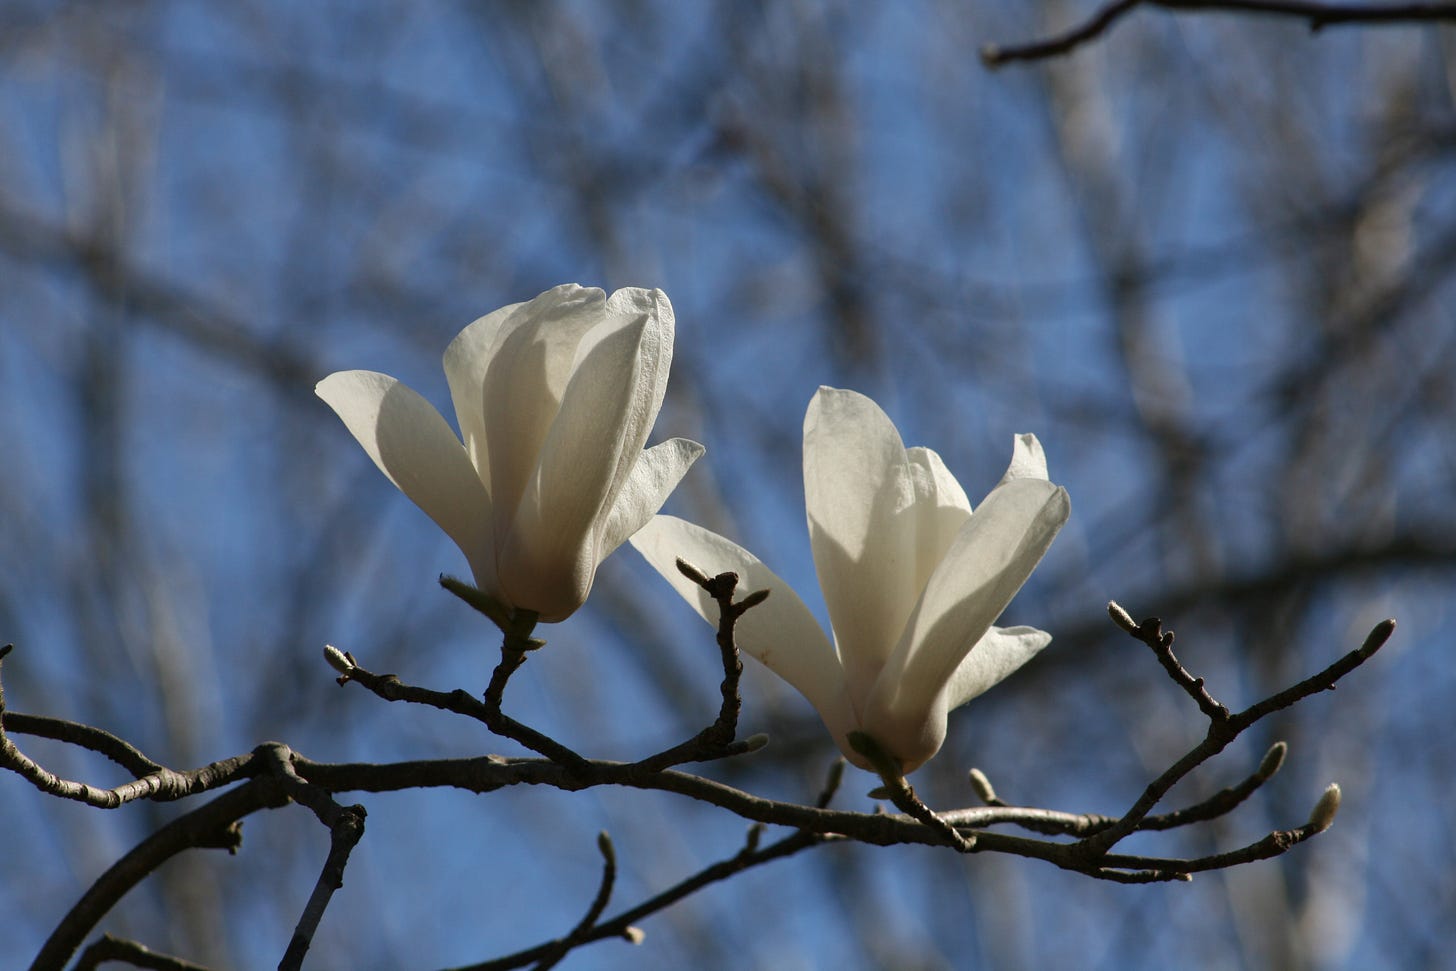 White flowers on tree branch.